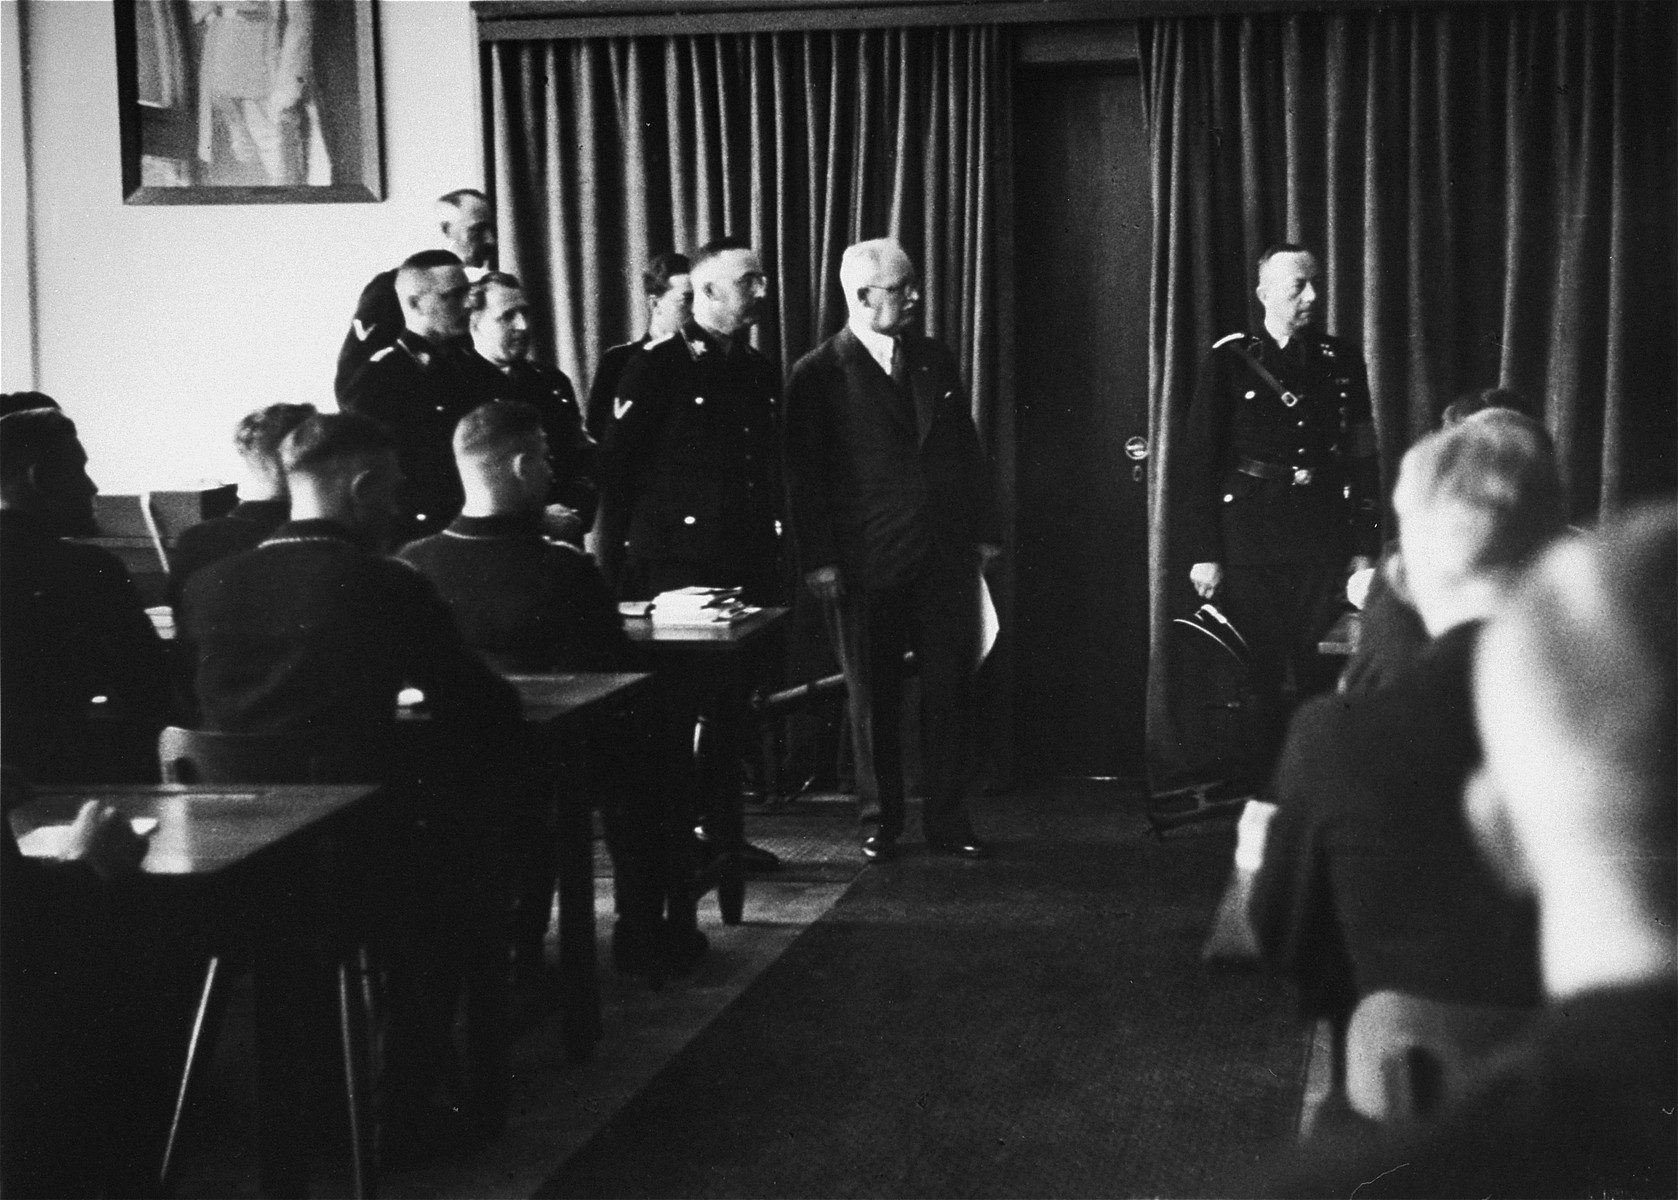 Heinrich Himmler gives a lecture to SS officers.  This image is from an album of SS photographs.